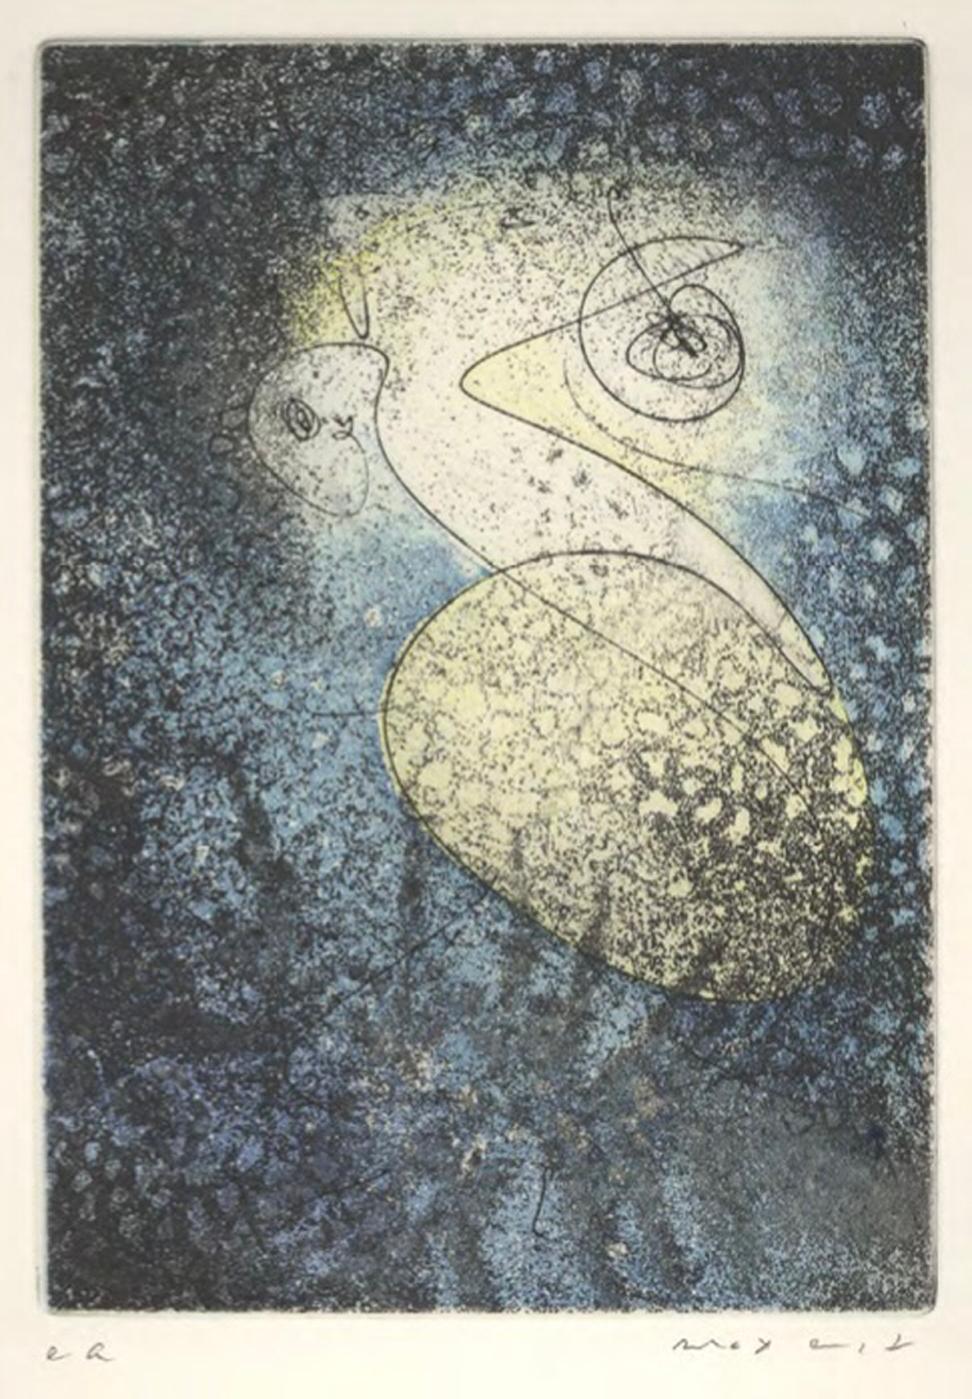 Max Ernst Abstract Print - Untitled 1965 #107A Surrealist - Etching & Aquatint in colors Blue Yellow Black